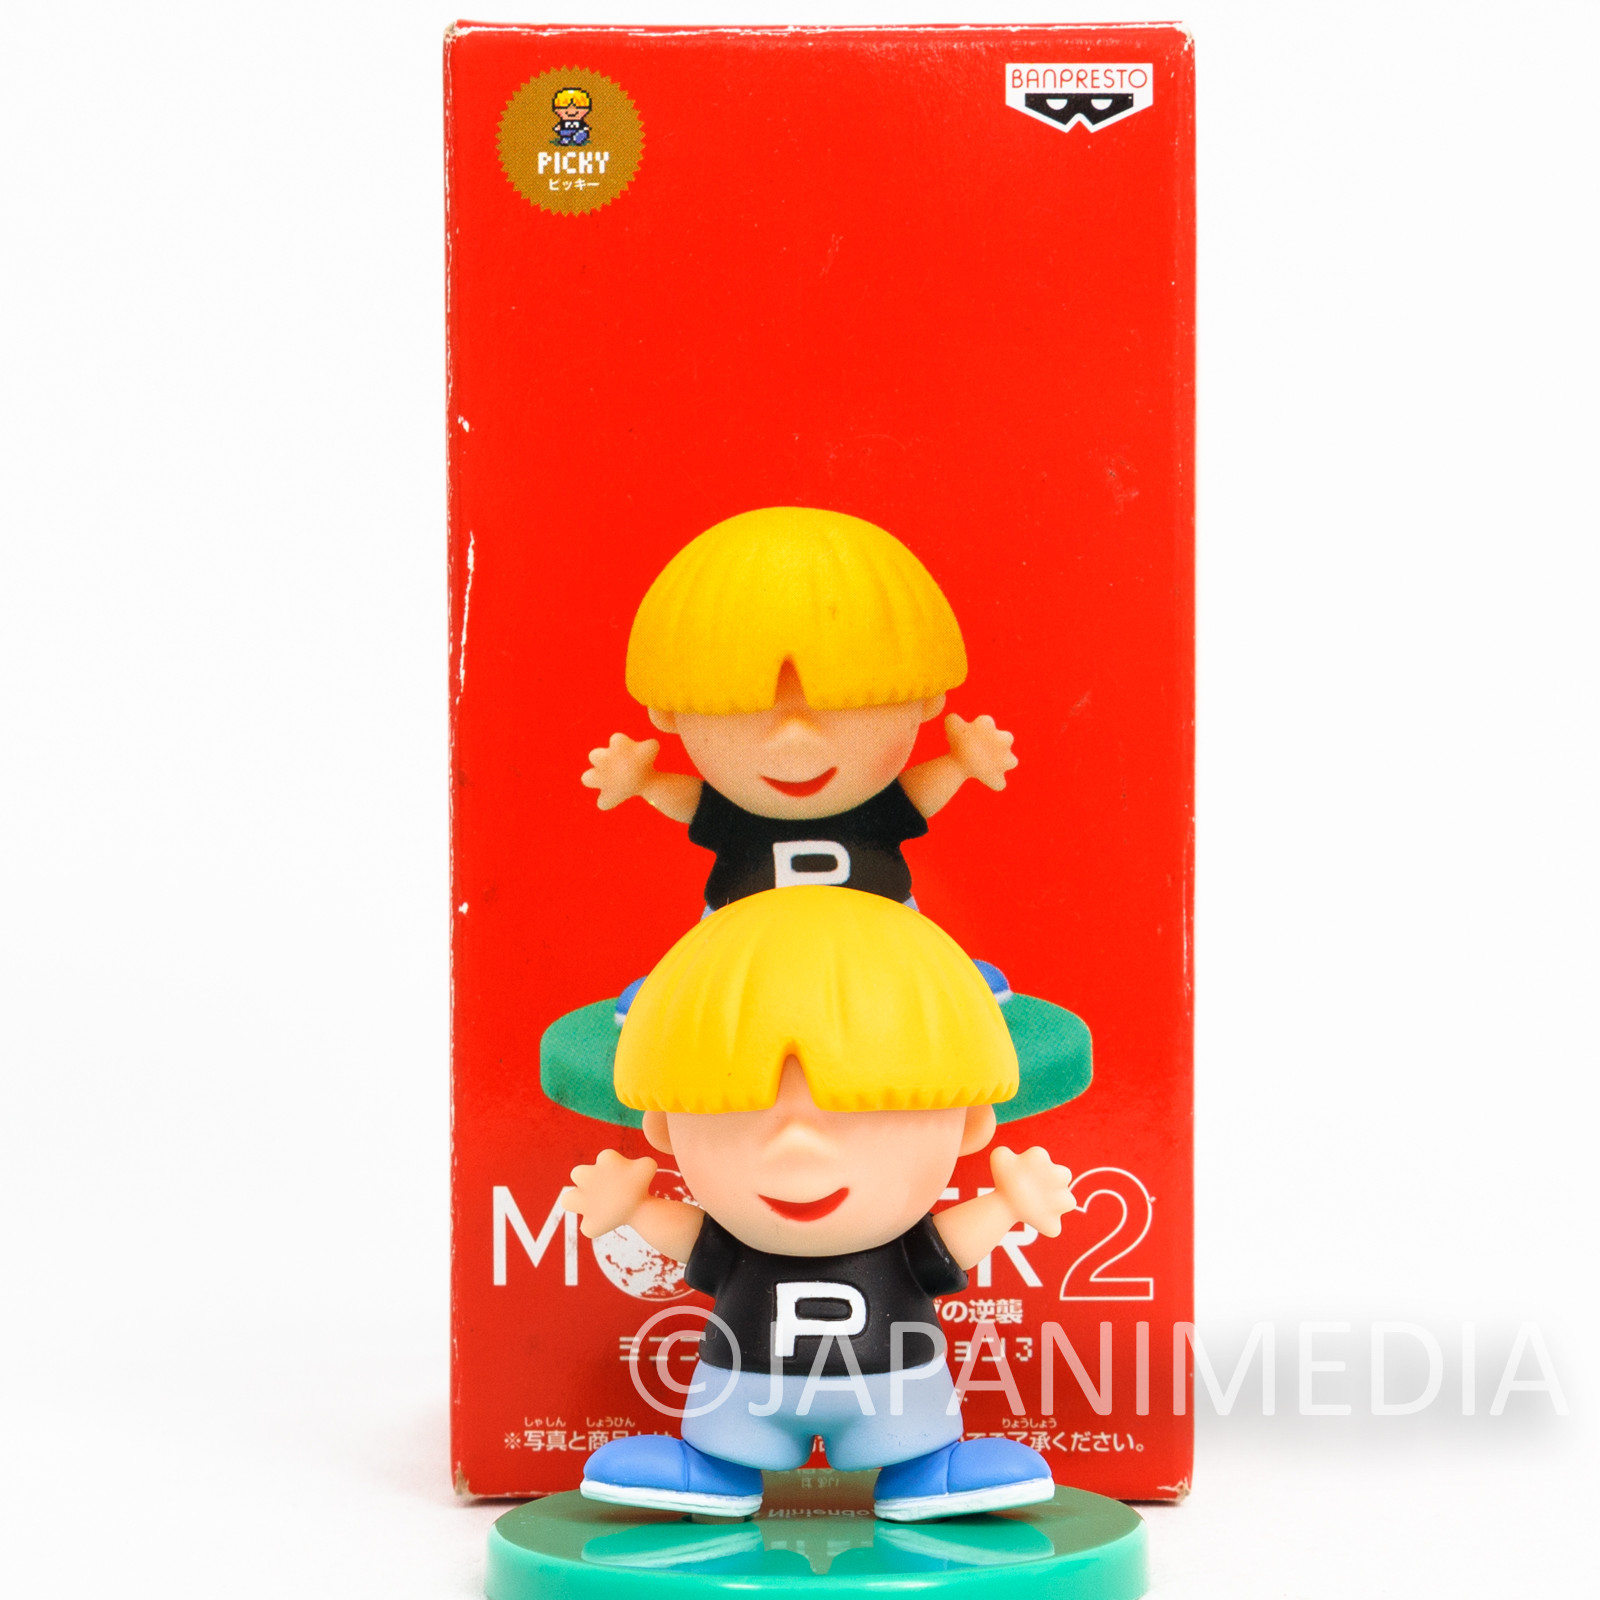 MOTHER 2 Picky Minch Mini Figure Collection Earthbound NINTENDO